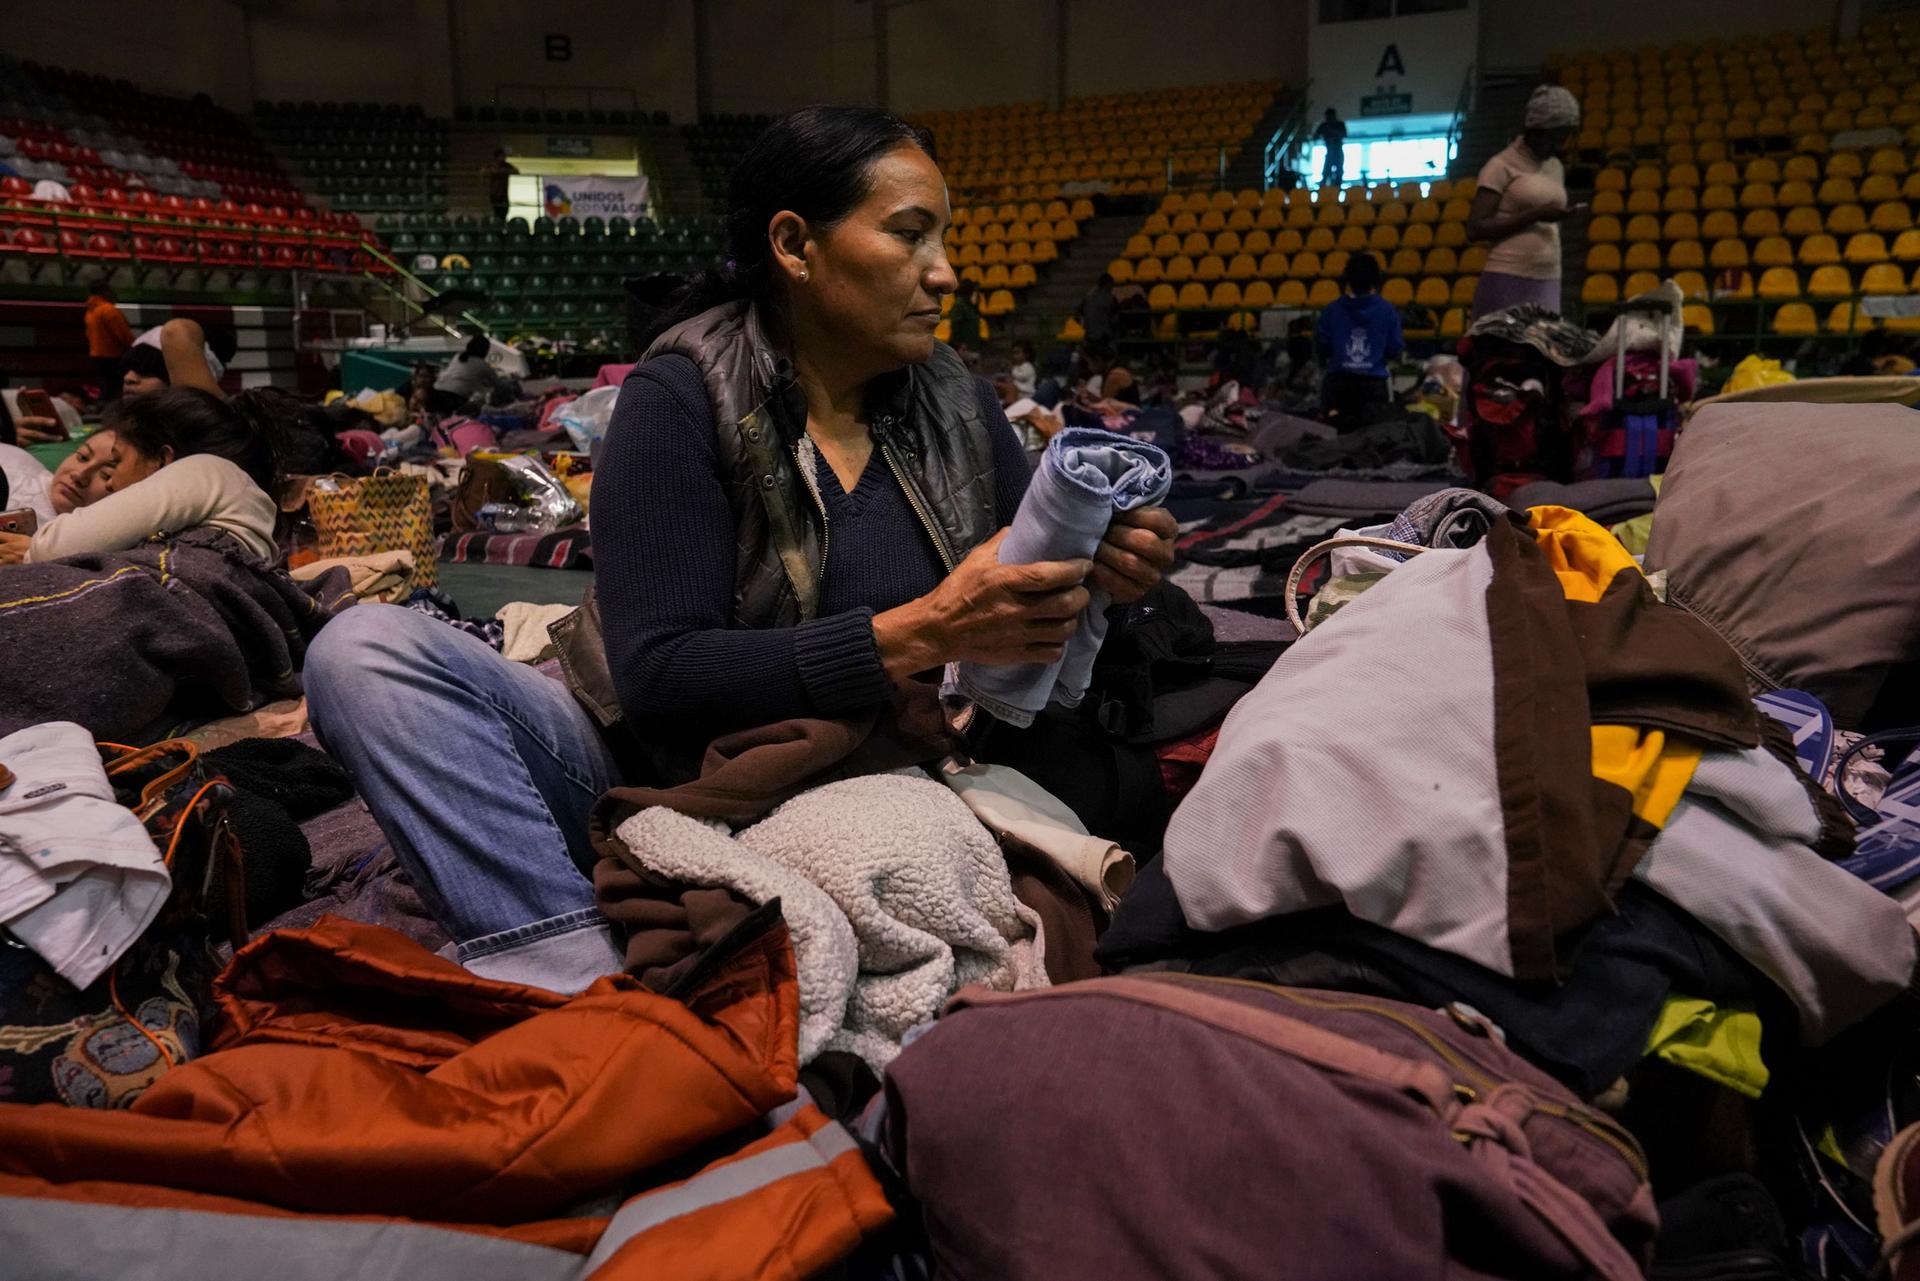 Sandra García is shown sitting on mat on the floor of a gymnasium and folding clothes.